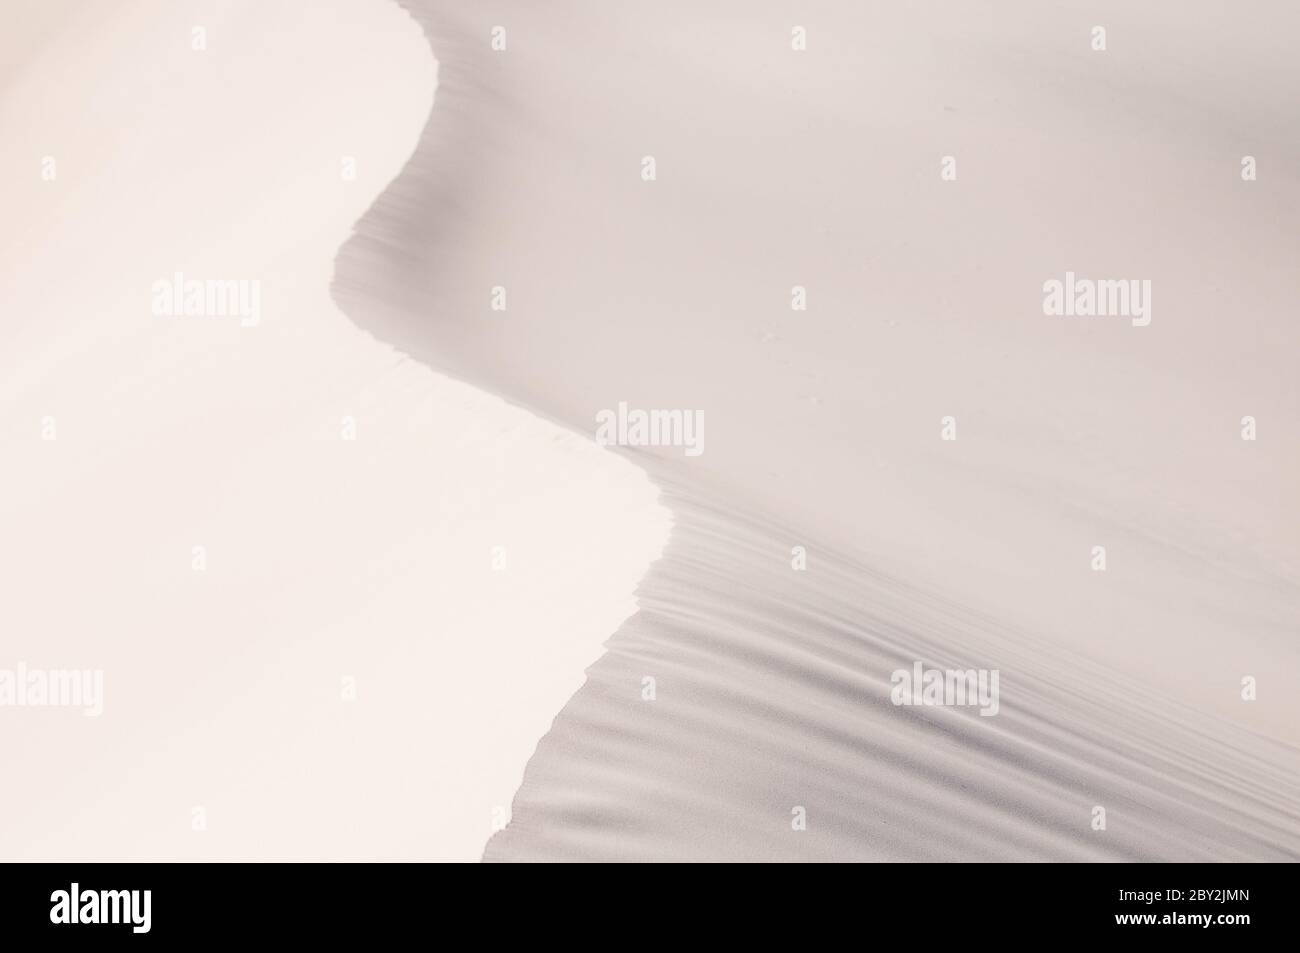 highly detailed texture of sand dunes Stock Photo